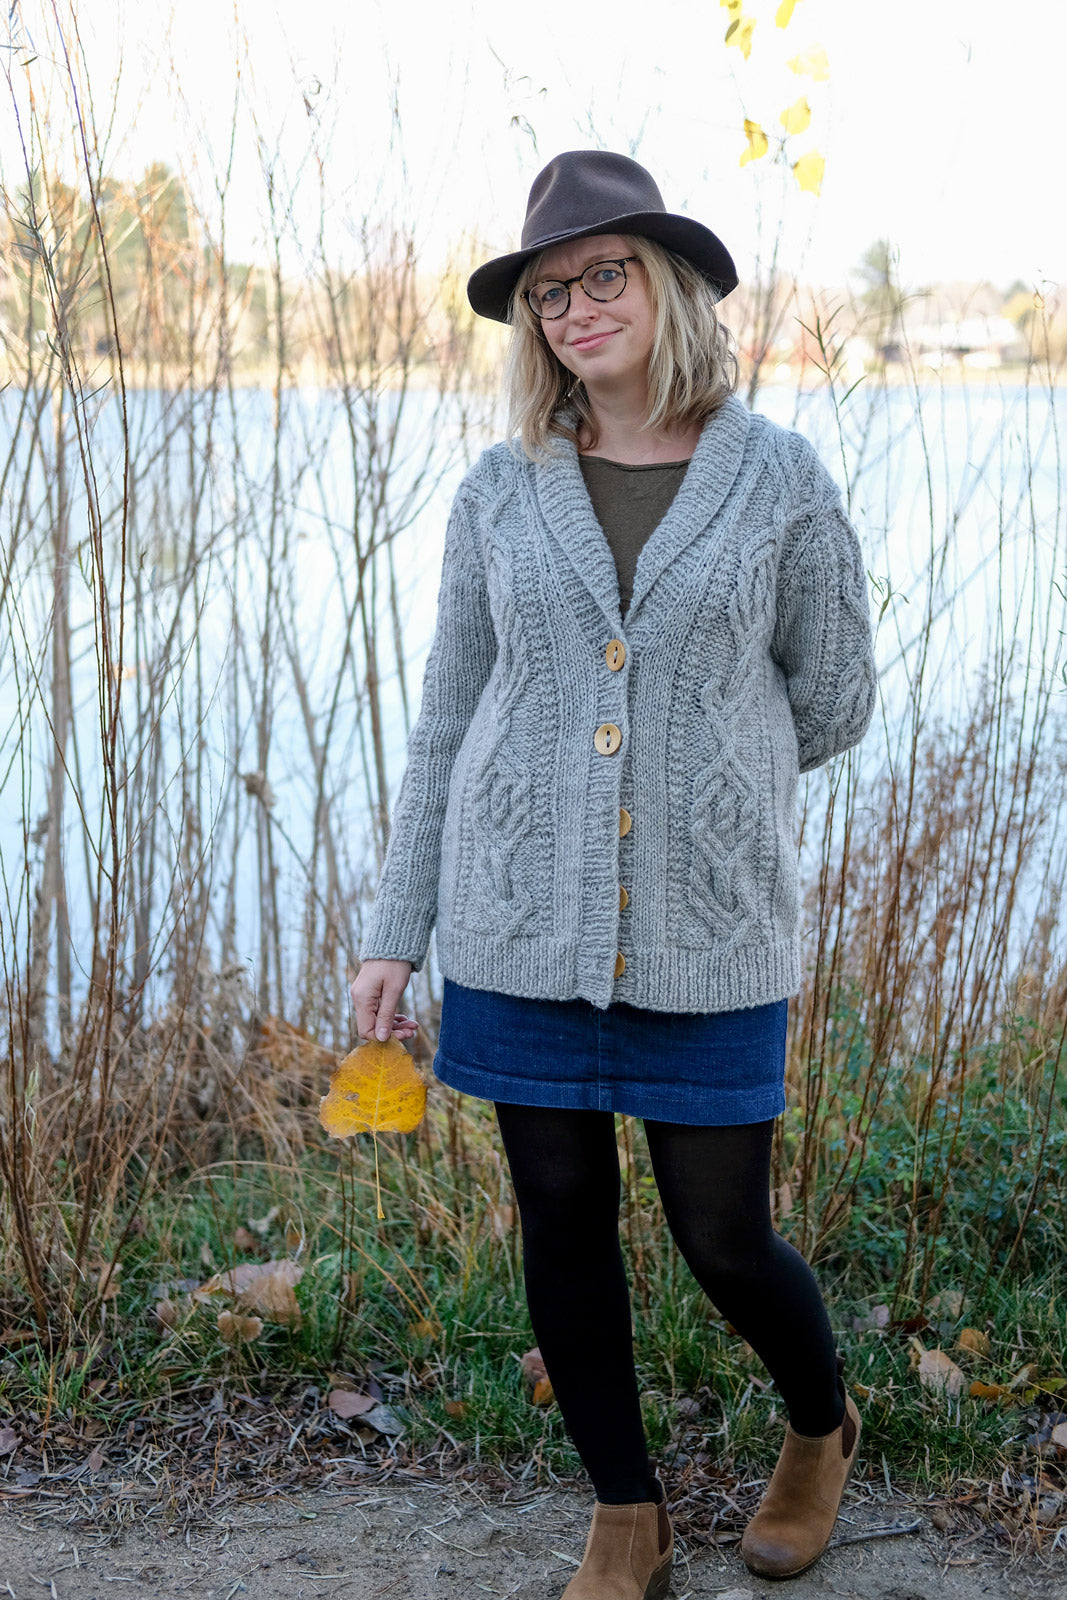 Amber by the lake holding a leaf in her Cabled Junegrass Sweater